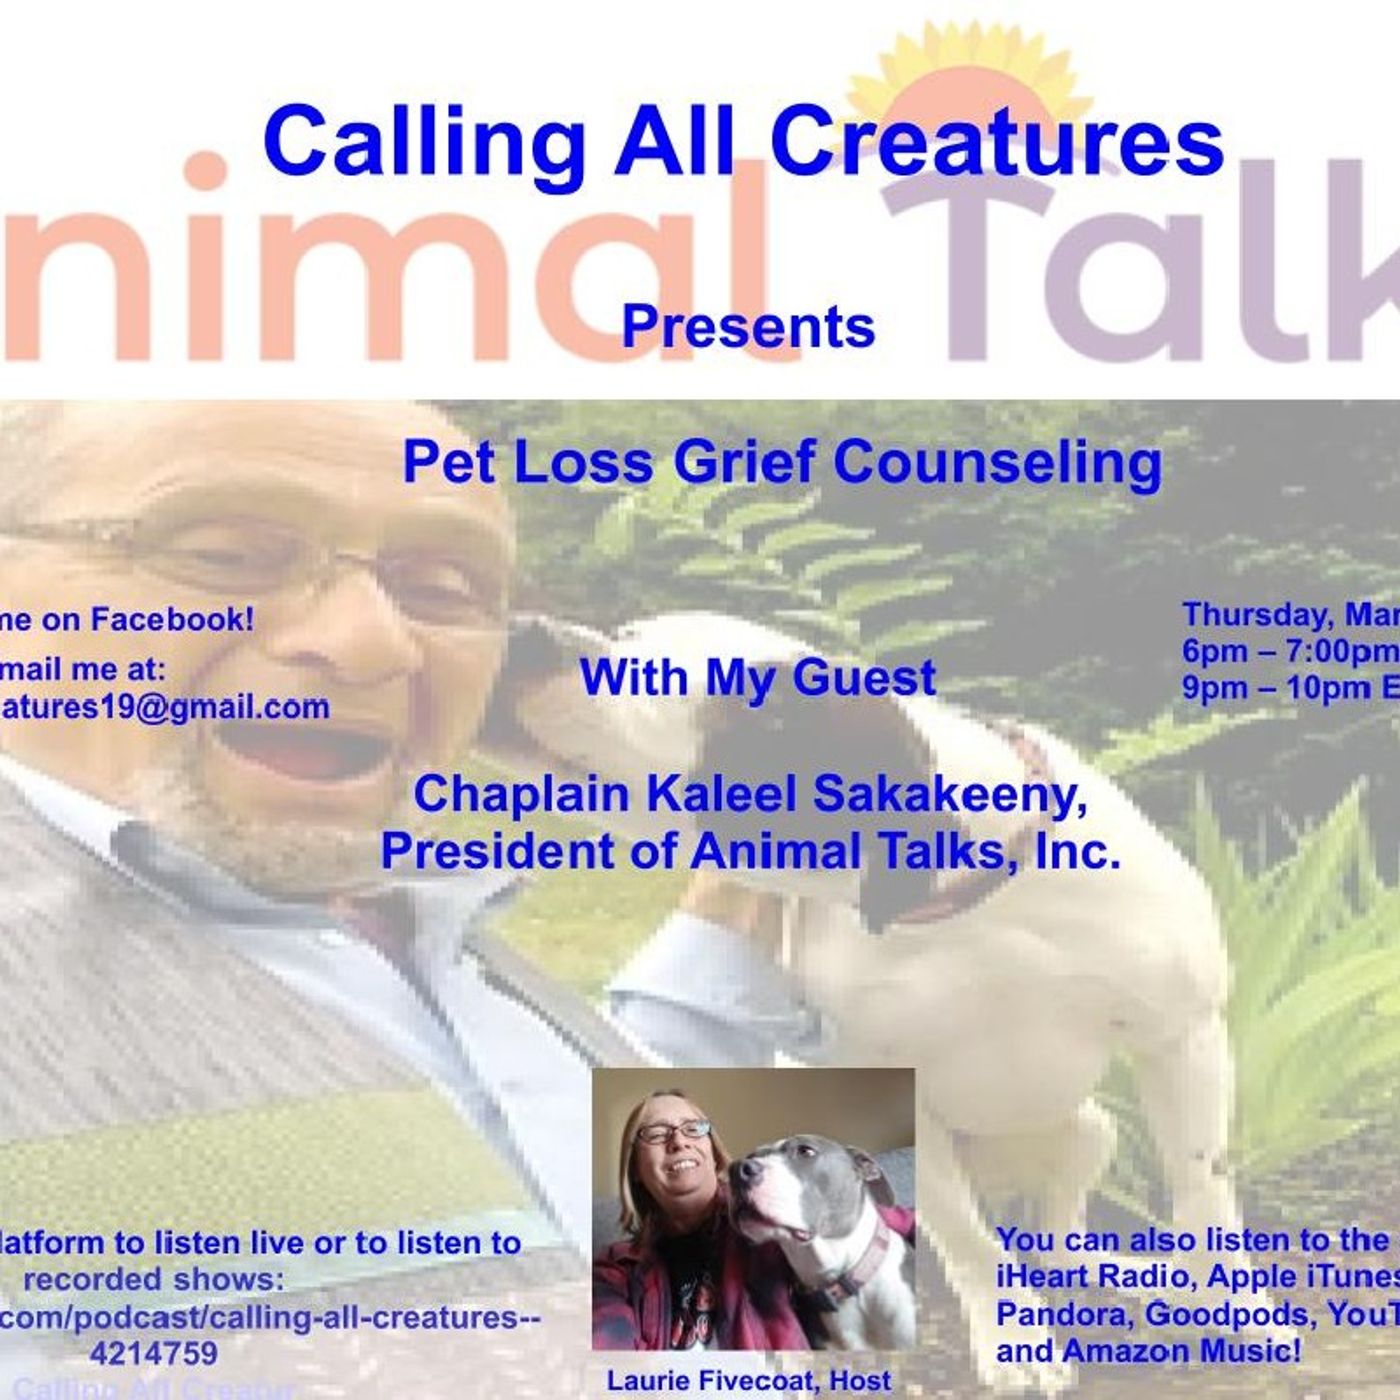 Calling All Creatures Presents Pet Loss Grief Counseling